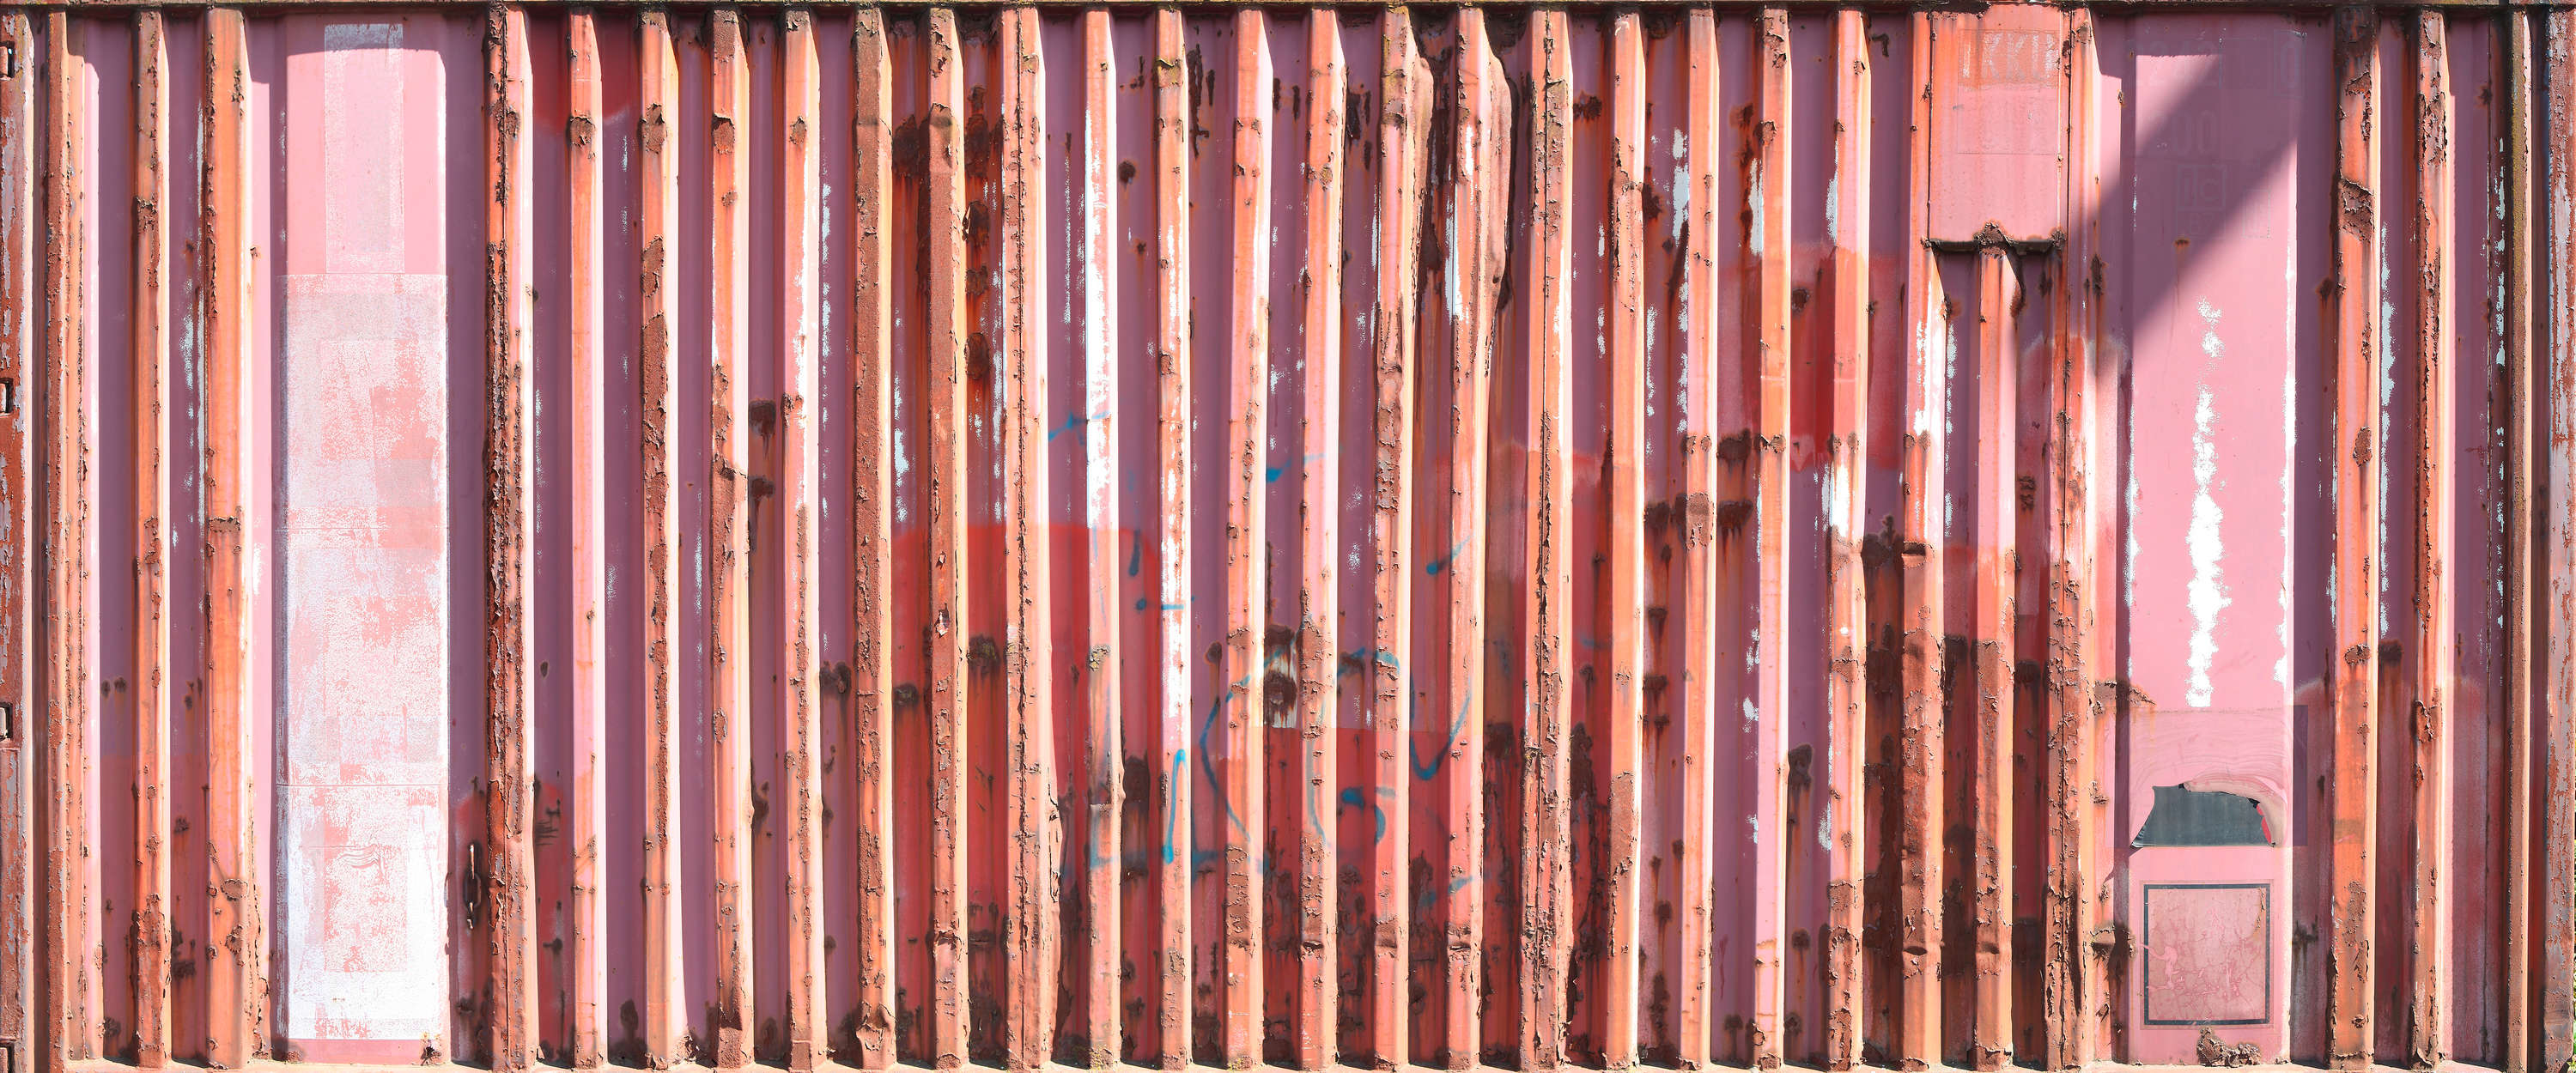             Red metal container mural
        